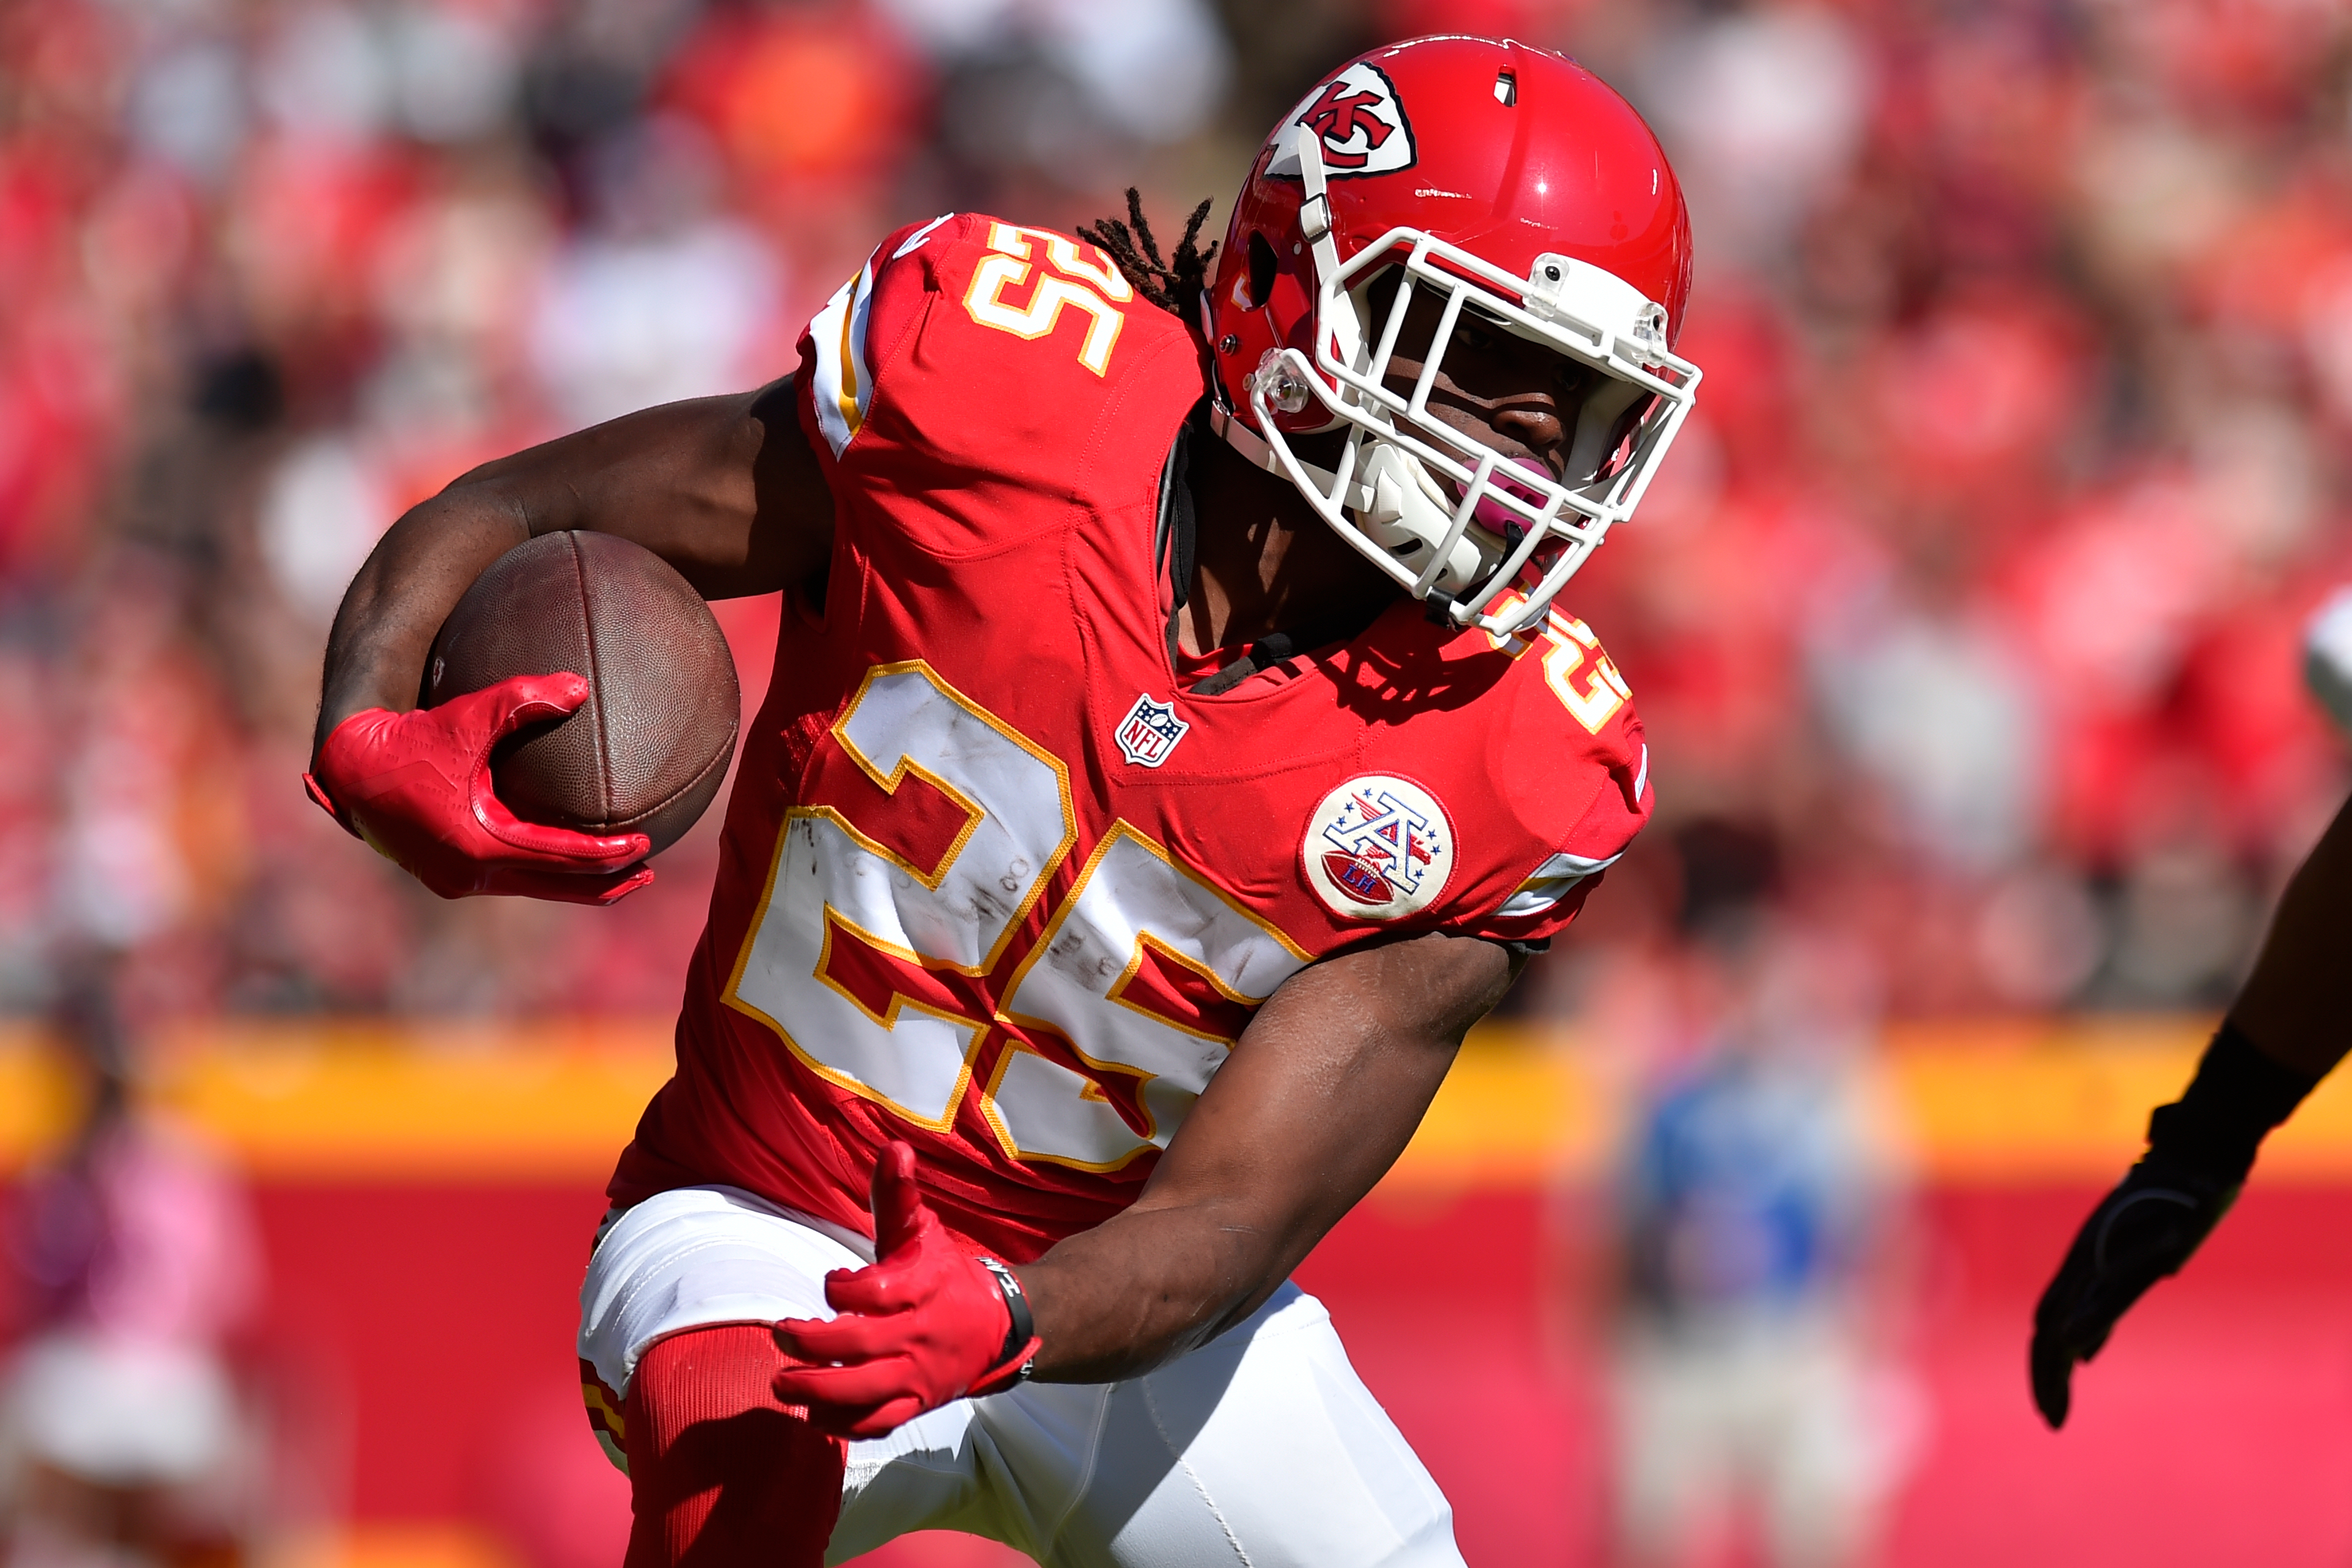 Kansas City Chiefs could have Jamaal Charles back in Week 17